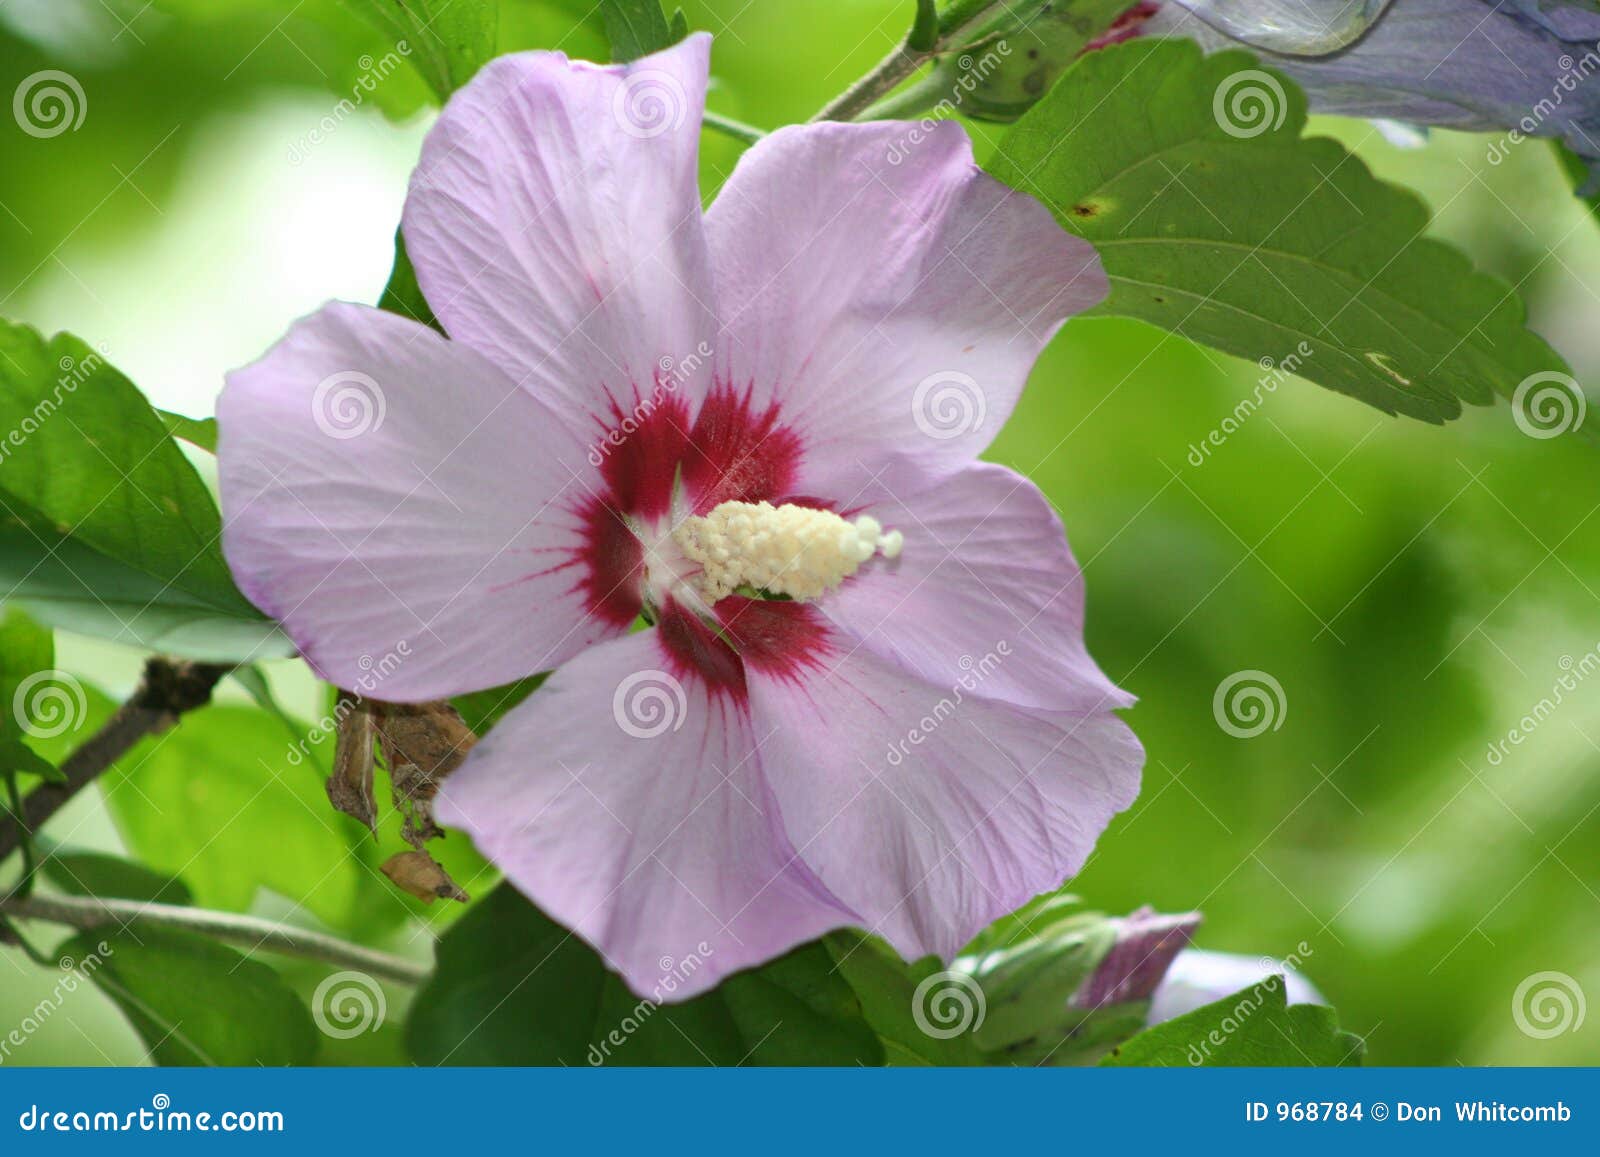 clipart rose of sharon - photo #16